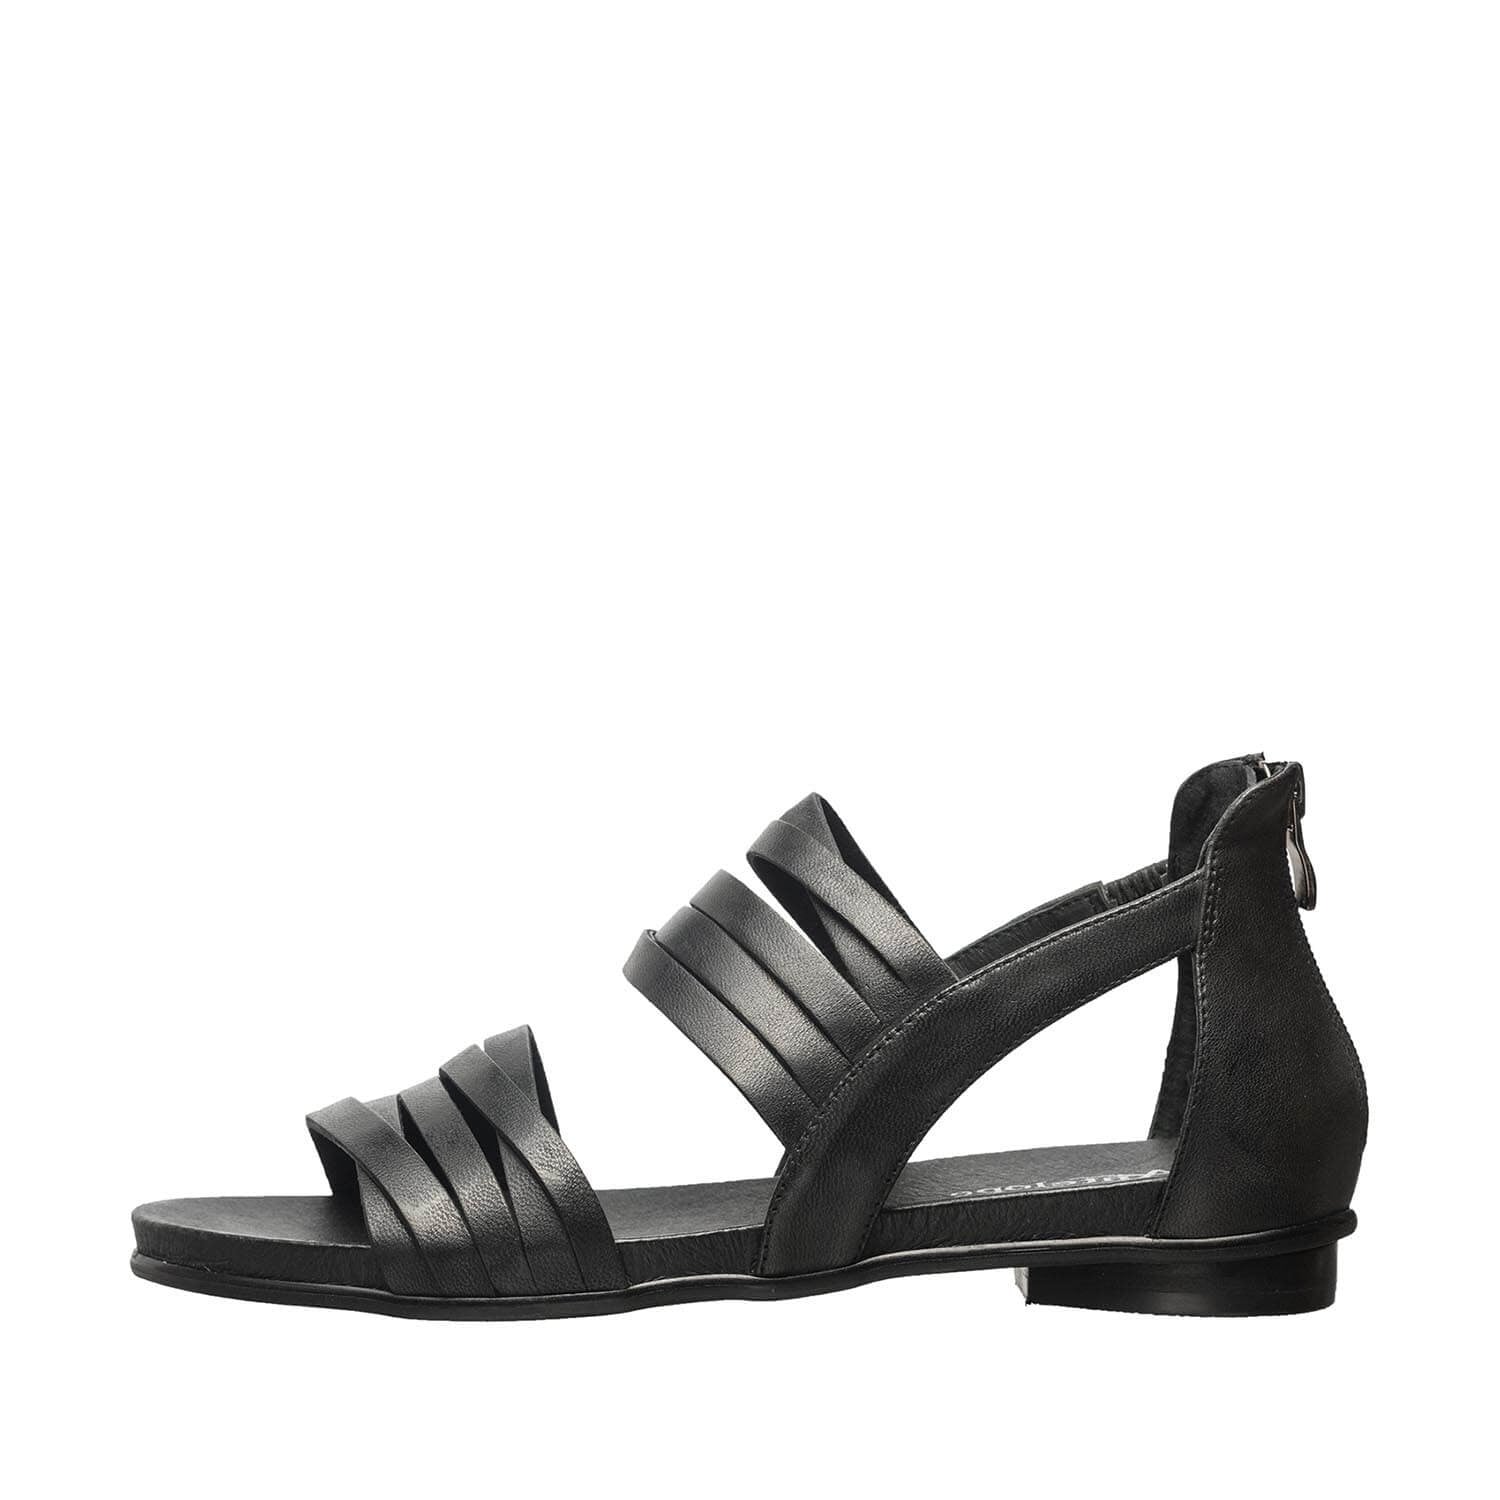 Dress Sandals With Arch Support – antelopeshoes